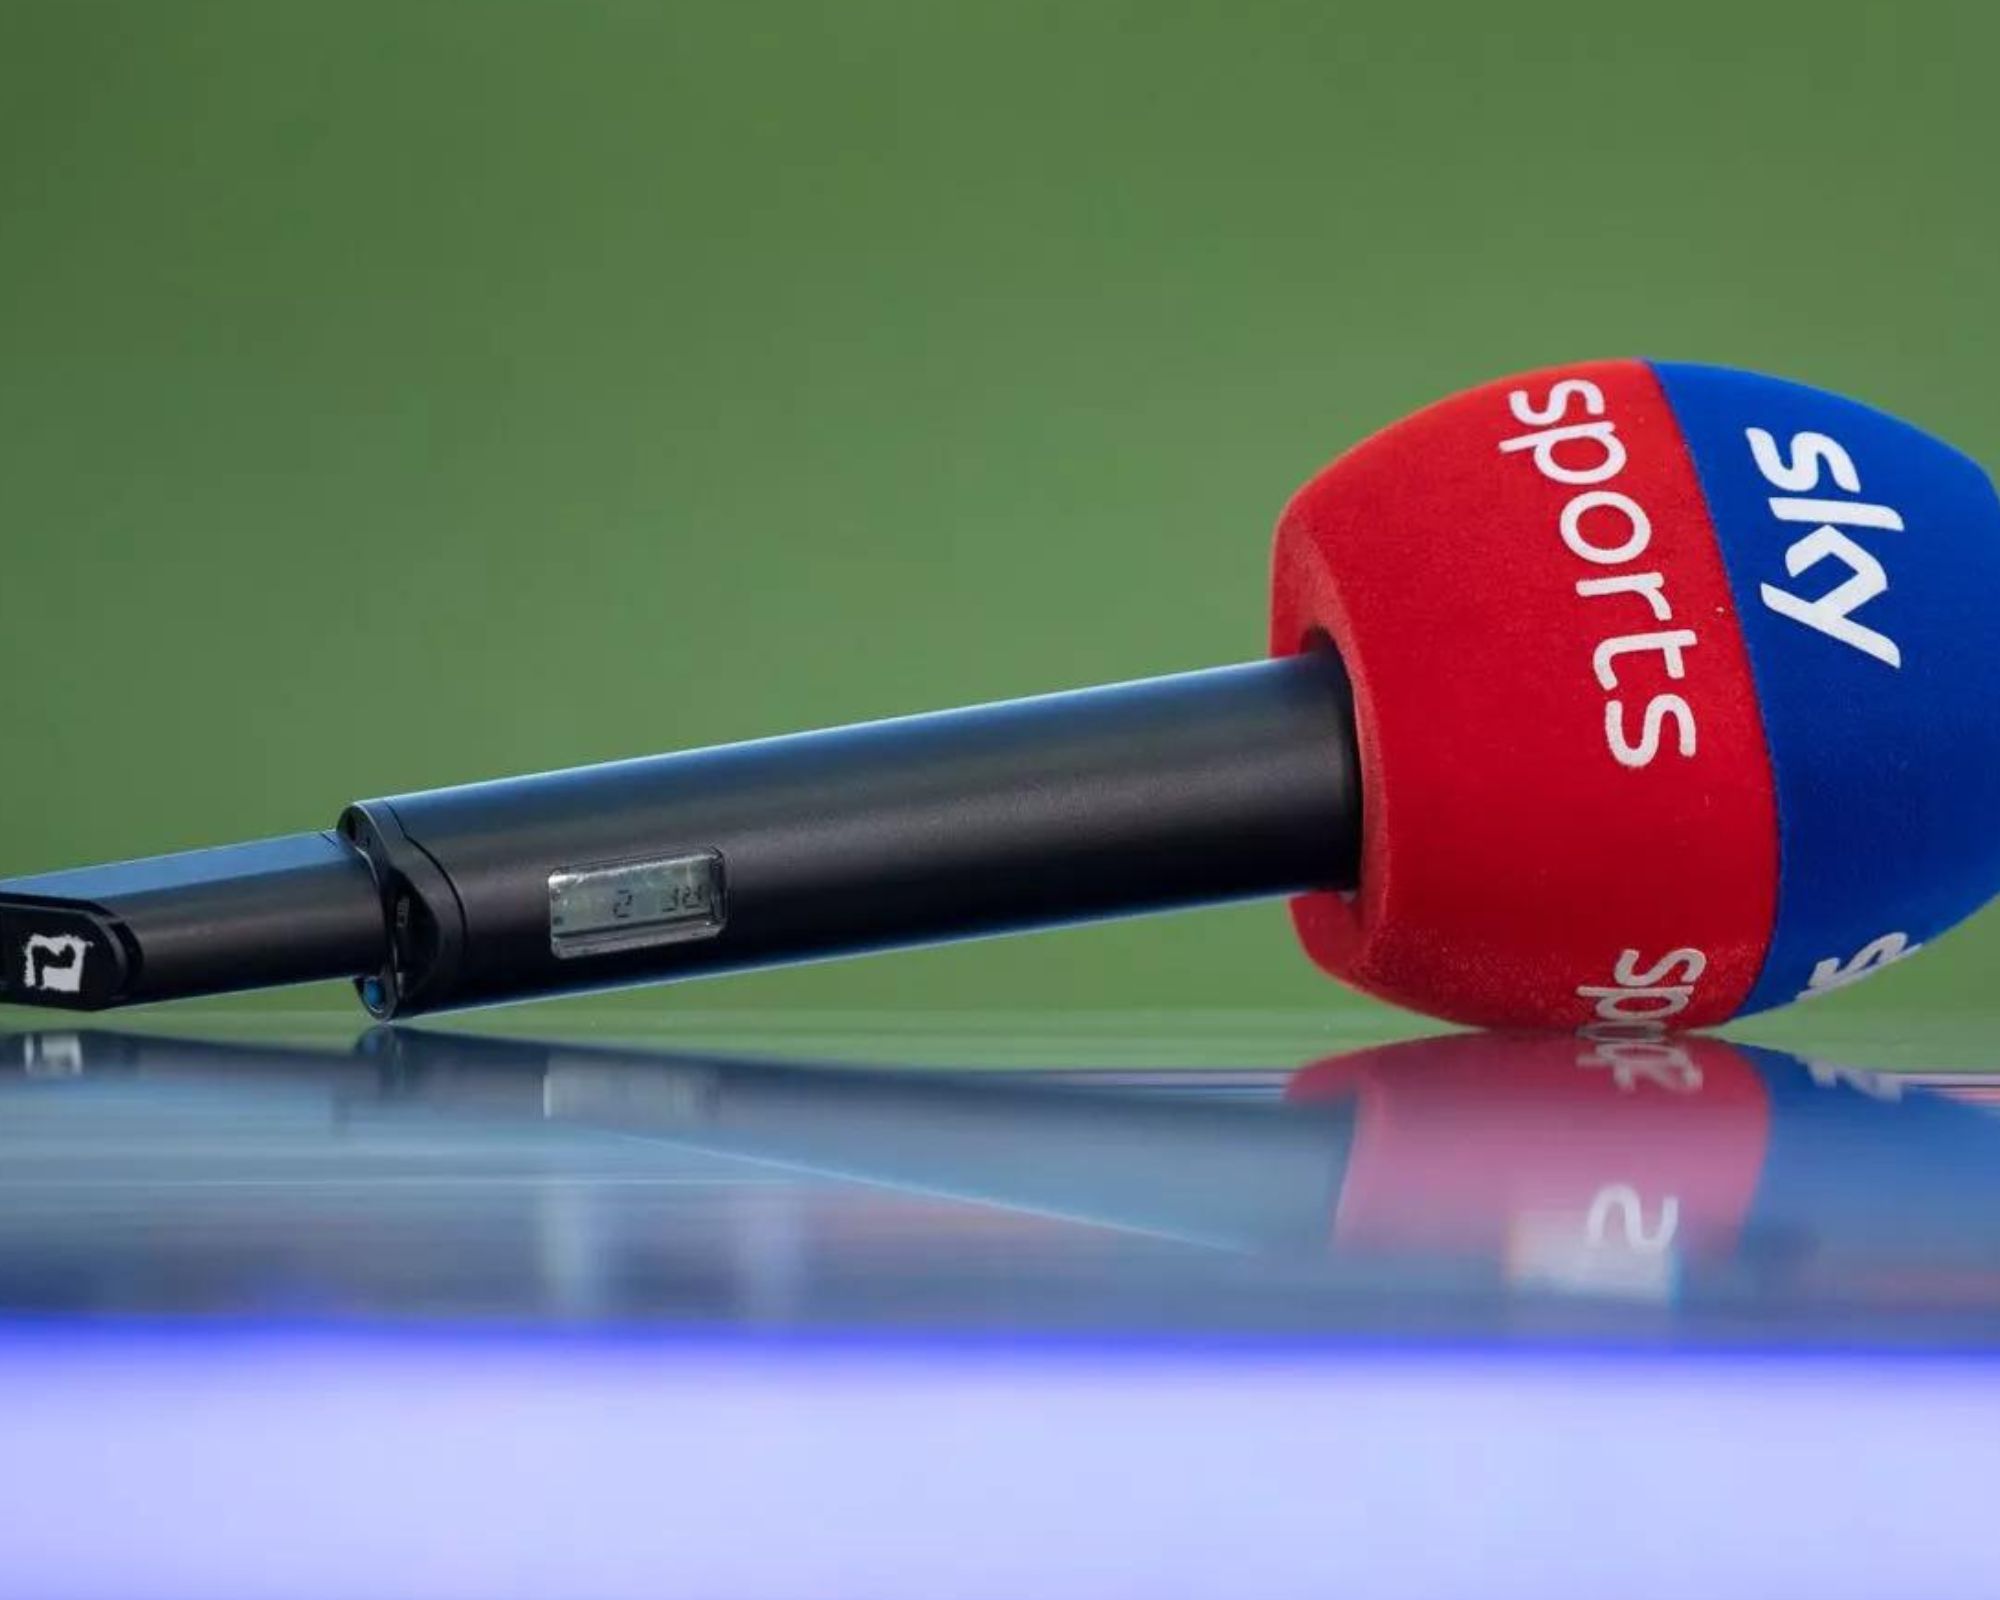 Sky Sports explained: what you need to know about the UK's biggest sports broadcaster